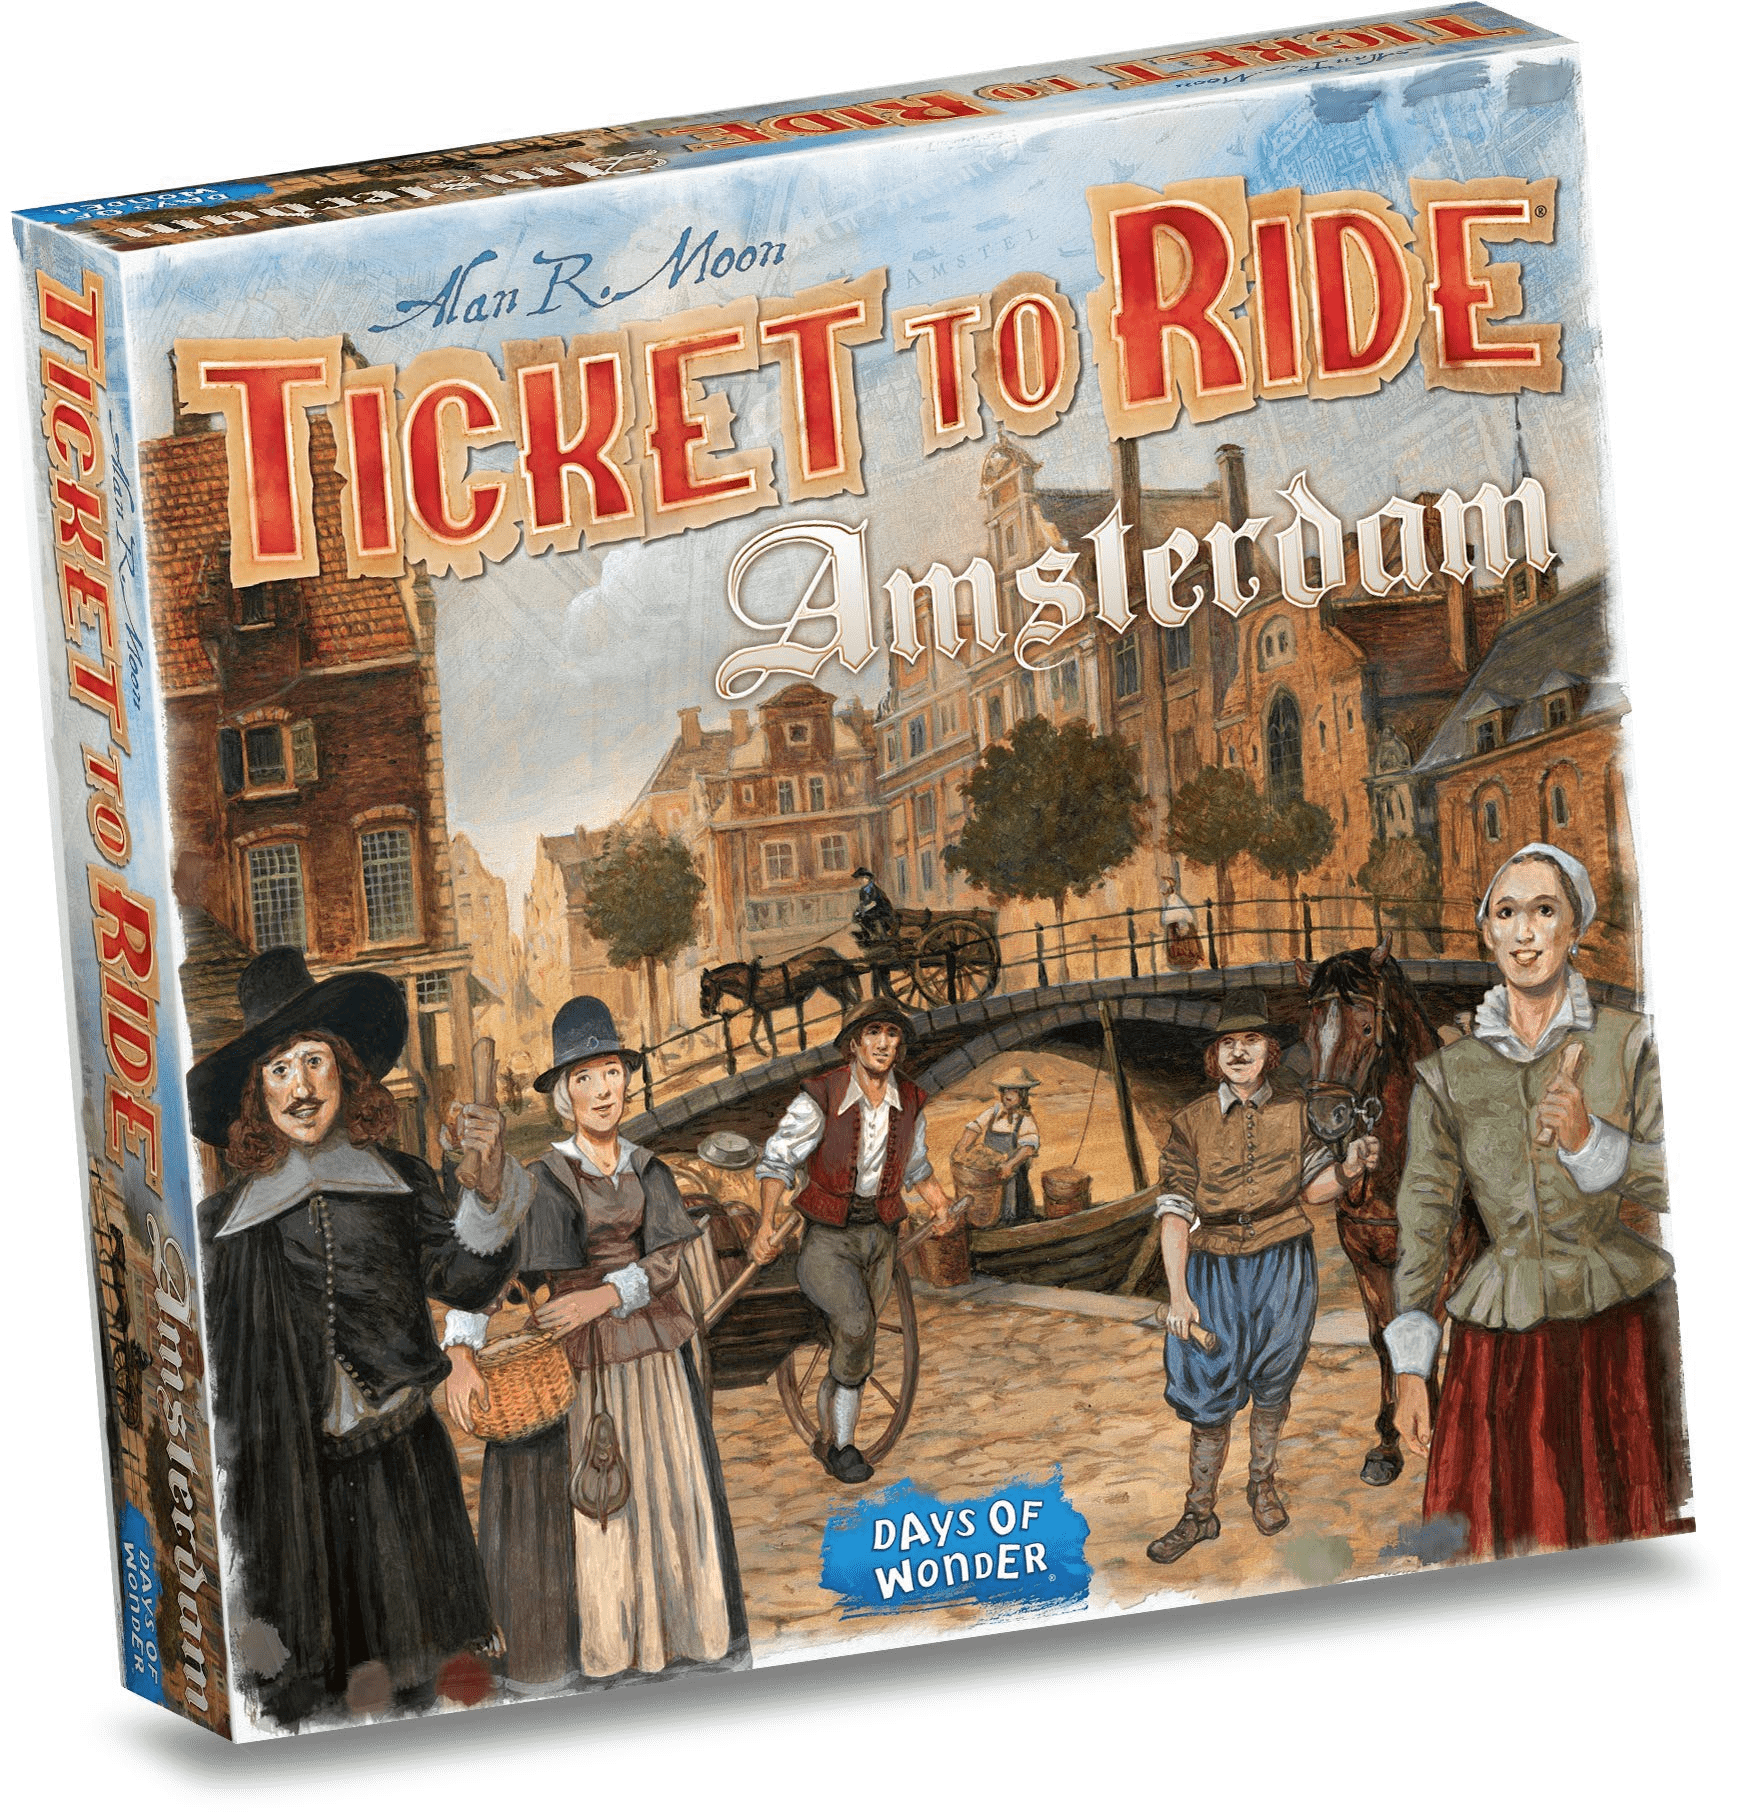 Ticket to ride Amsterdam